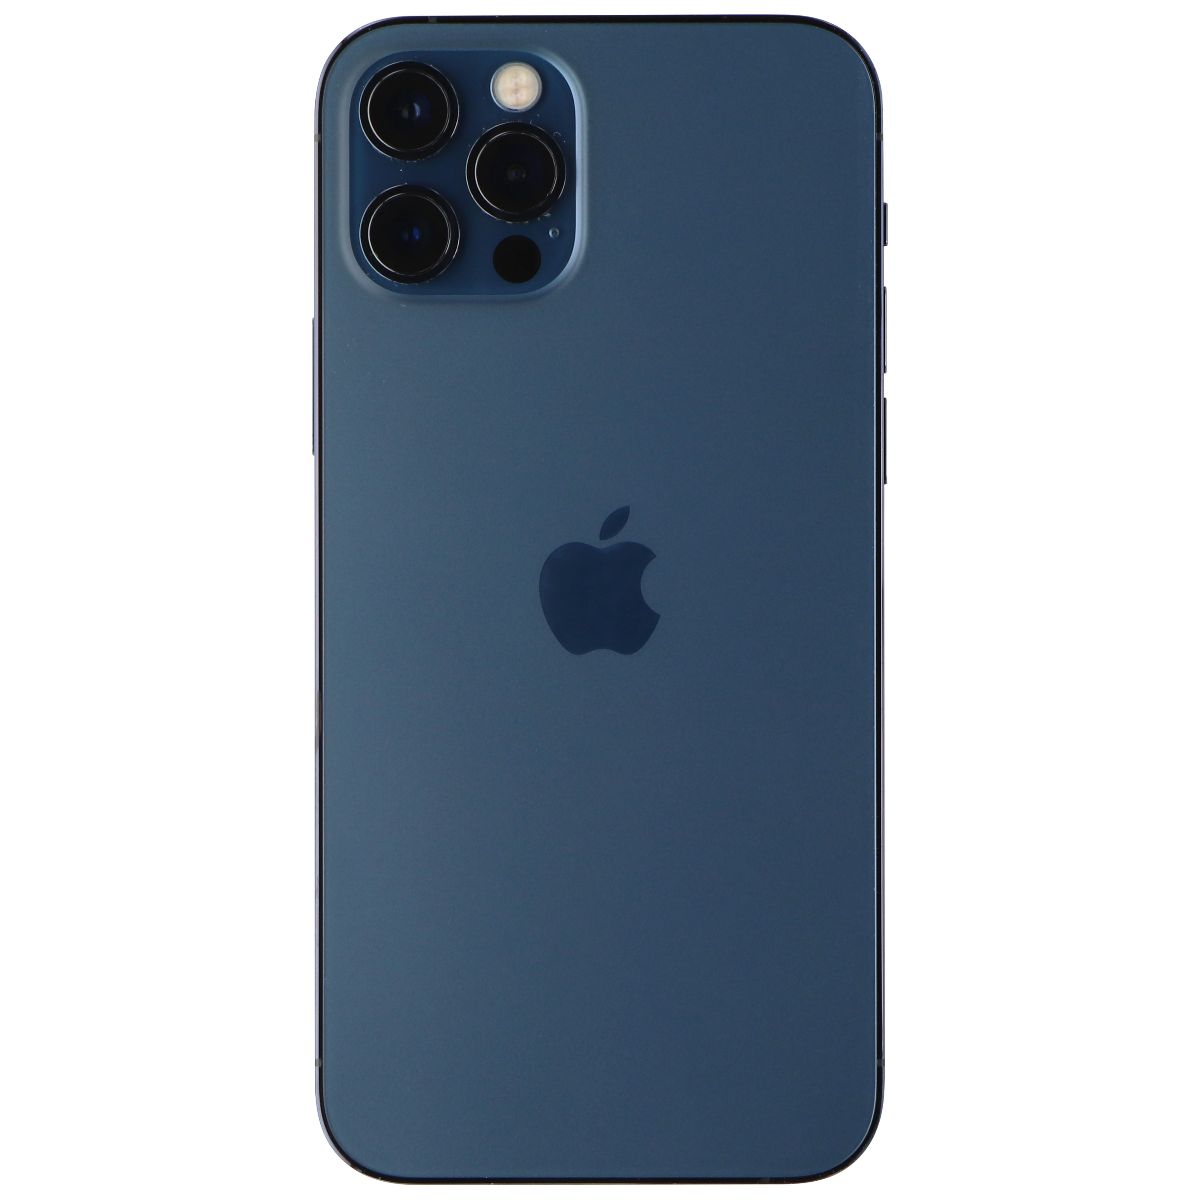 Apple iPhone 12 Pro (6.1-in) Smartphone (A2341) Unlocked - 256GB/Pacific Blue Cell Phones & Smartphones Apple    - Simple Cell Bulk Wholesale Pricing - USA Seller